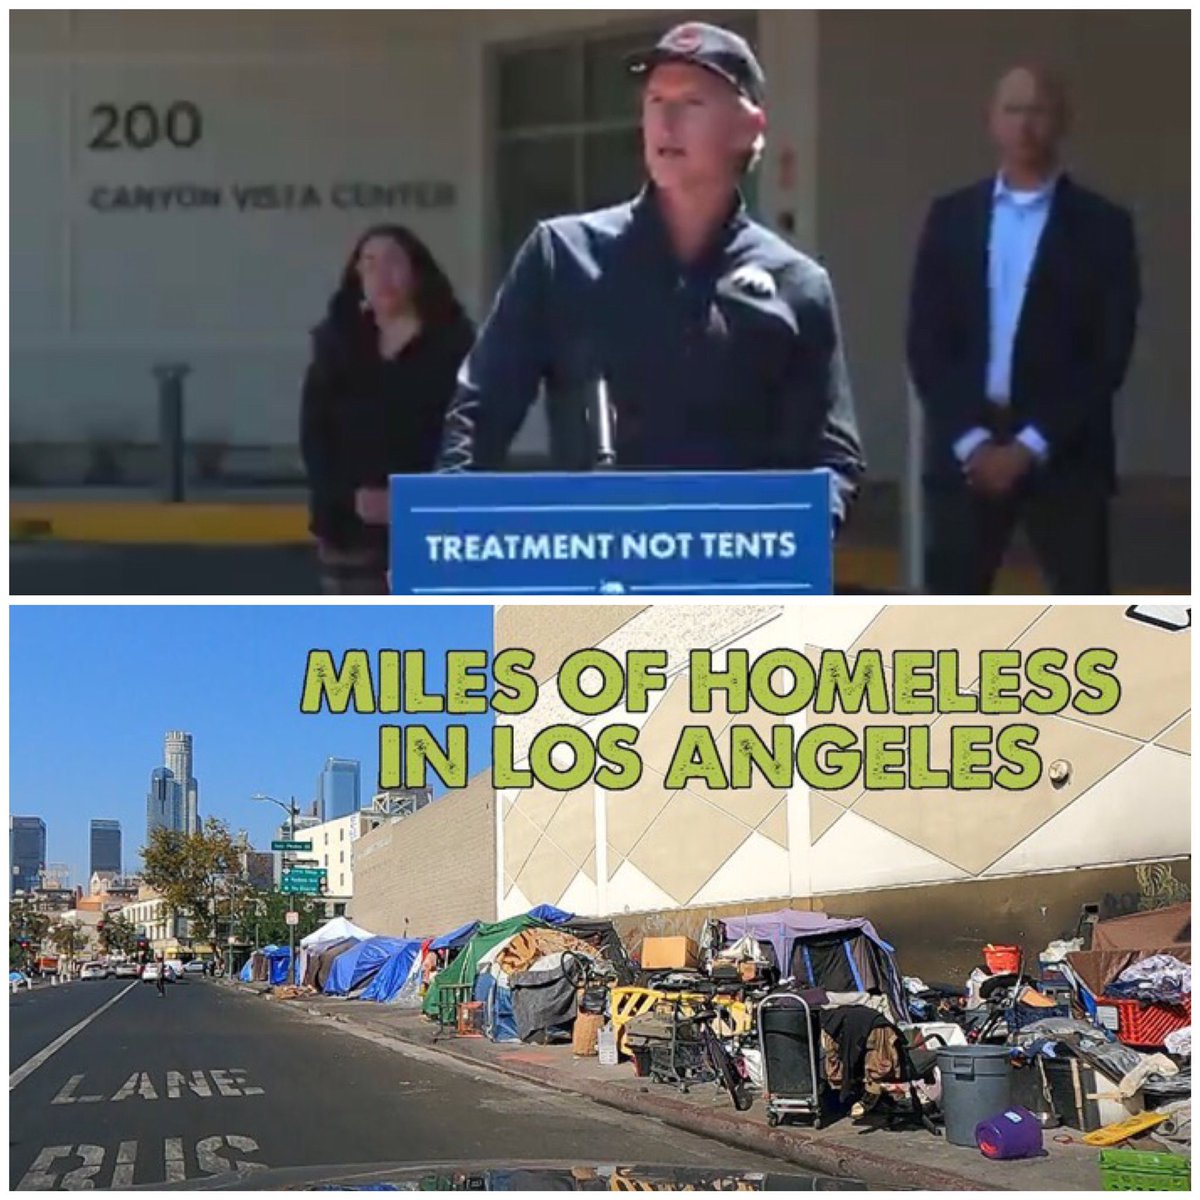 Governor Newsom has been #Markled. He spent time during a news conference to address Meghan and Harry’s private delinquent charity and not address where the lost $24 billion dollars to tackle the LA homeless crisis is. Welcome to corrupt politicians doing grifters dirty work 🤦🏾‍♂️🙄